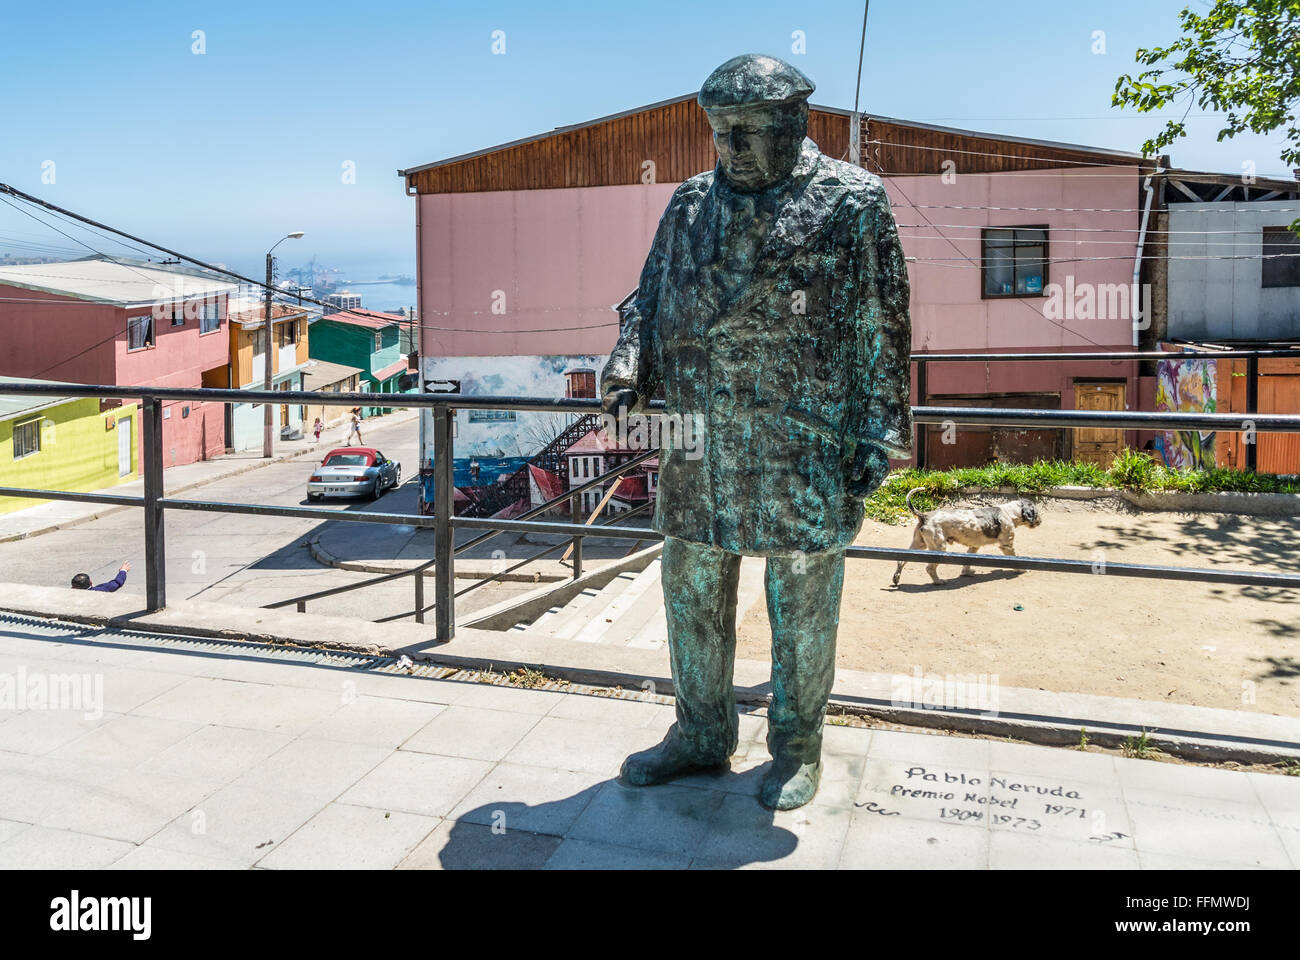 Statue of the Nobel Prize Winner Pablo Neruda in Valparaiso, Chile , where he had one of h Stock Photo